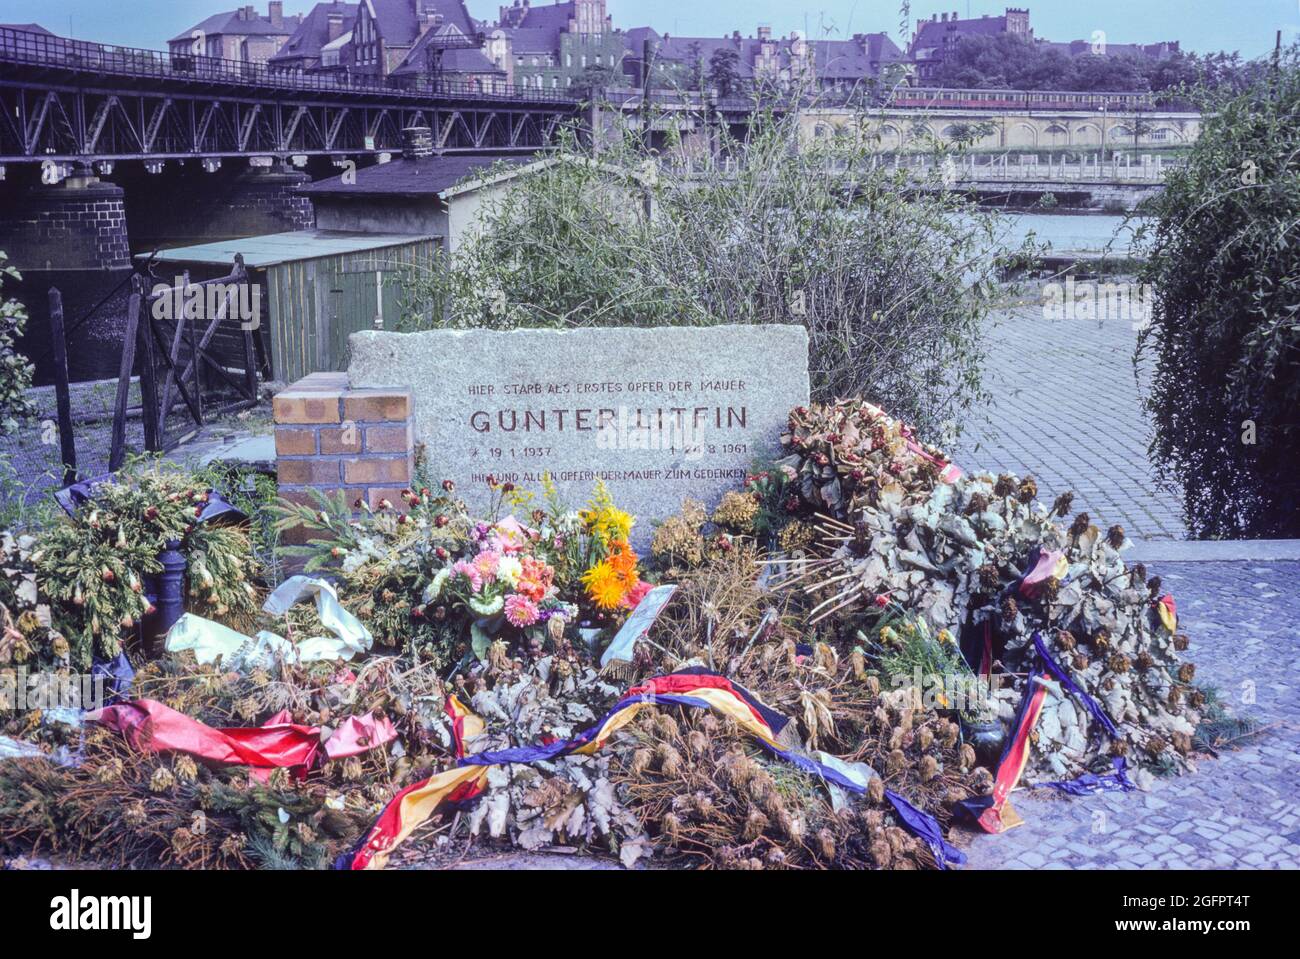 Berlin, Germany, August 1962. Memorial to the First Fatality of Someone Attempting to Cross over the Wall from East Berlin to West Berlin, Gunter Litfin. Stock Photo